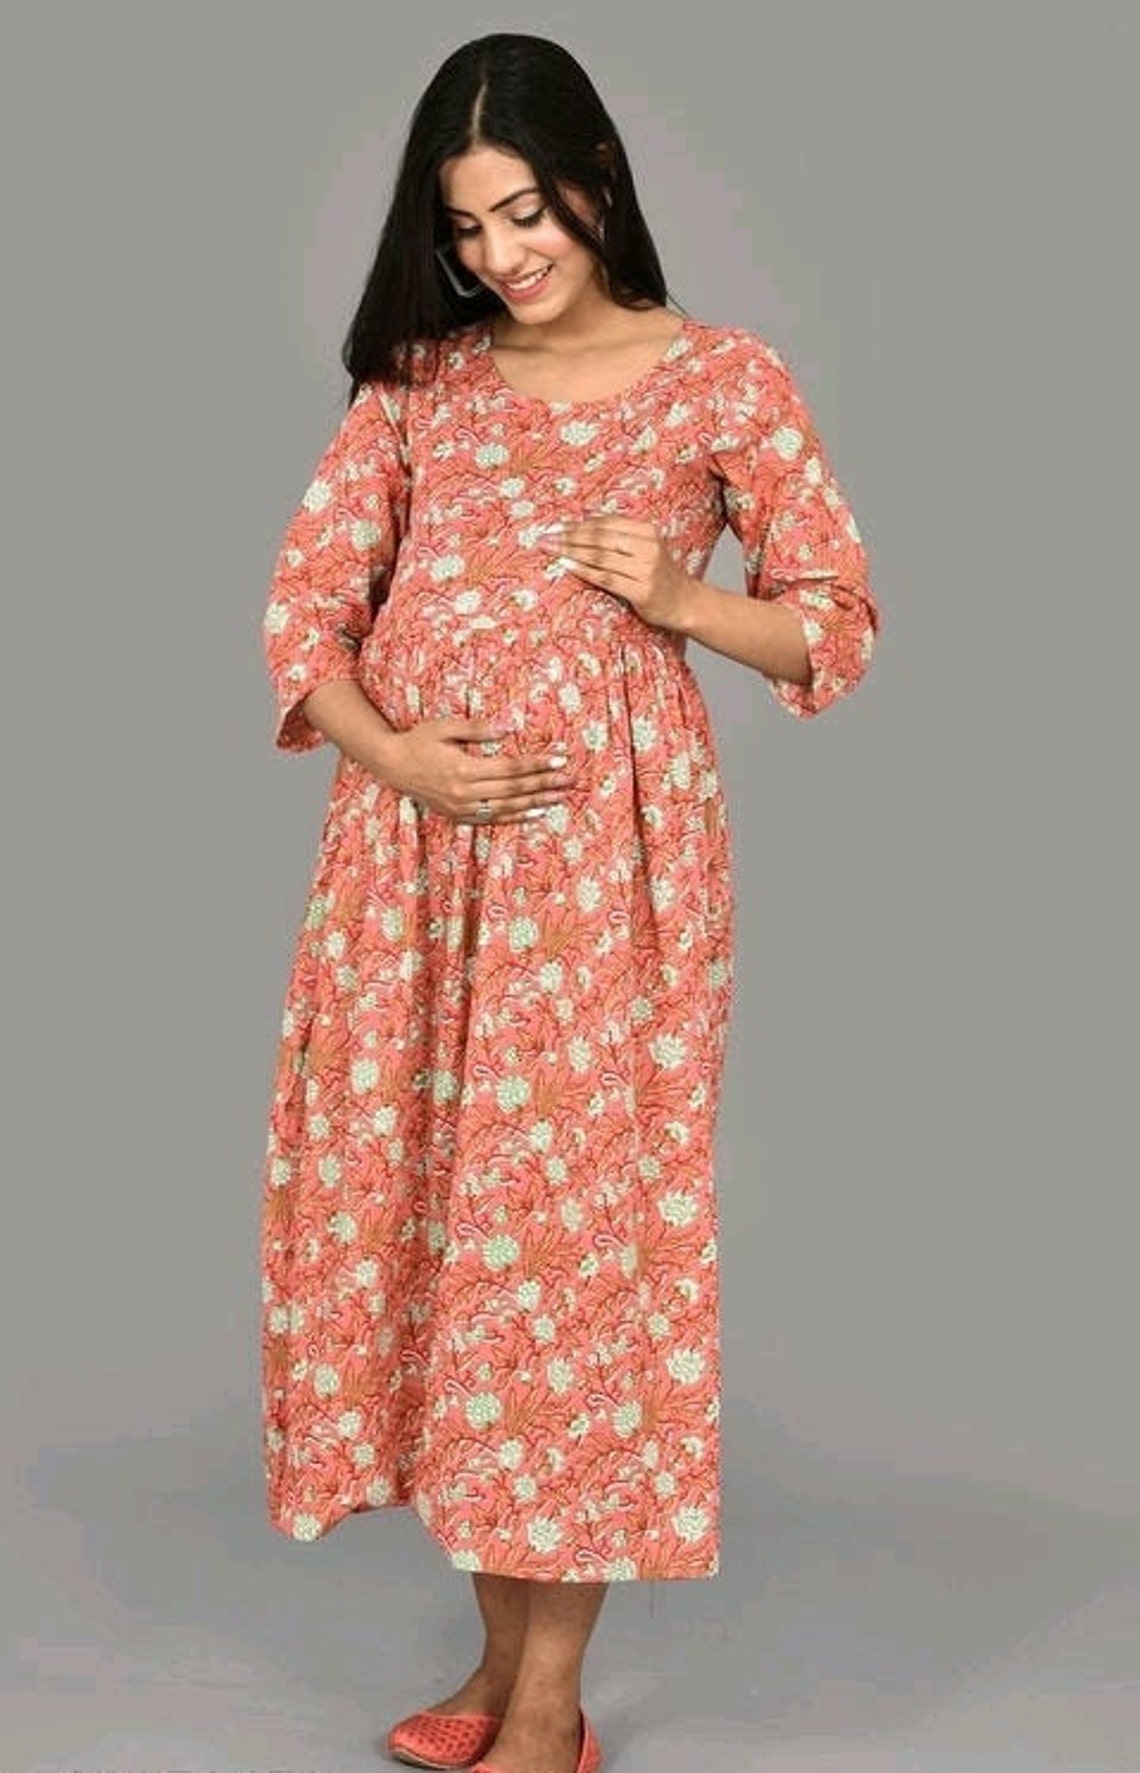 Attractive Pregnant / Maternity Women Kurti Gown Suit Easy | Etsy